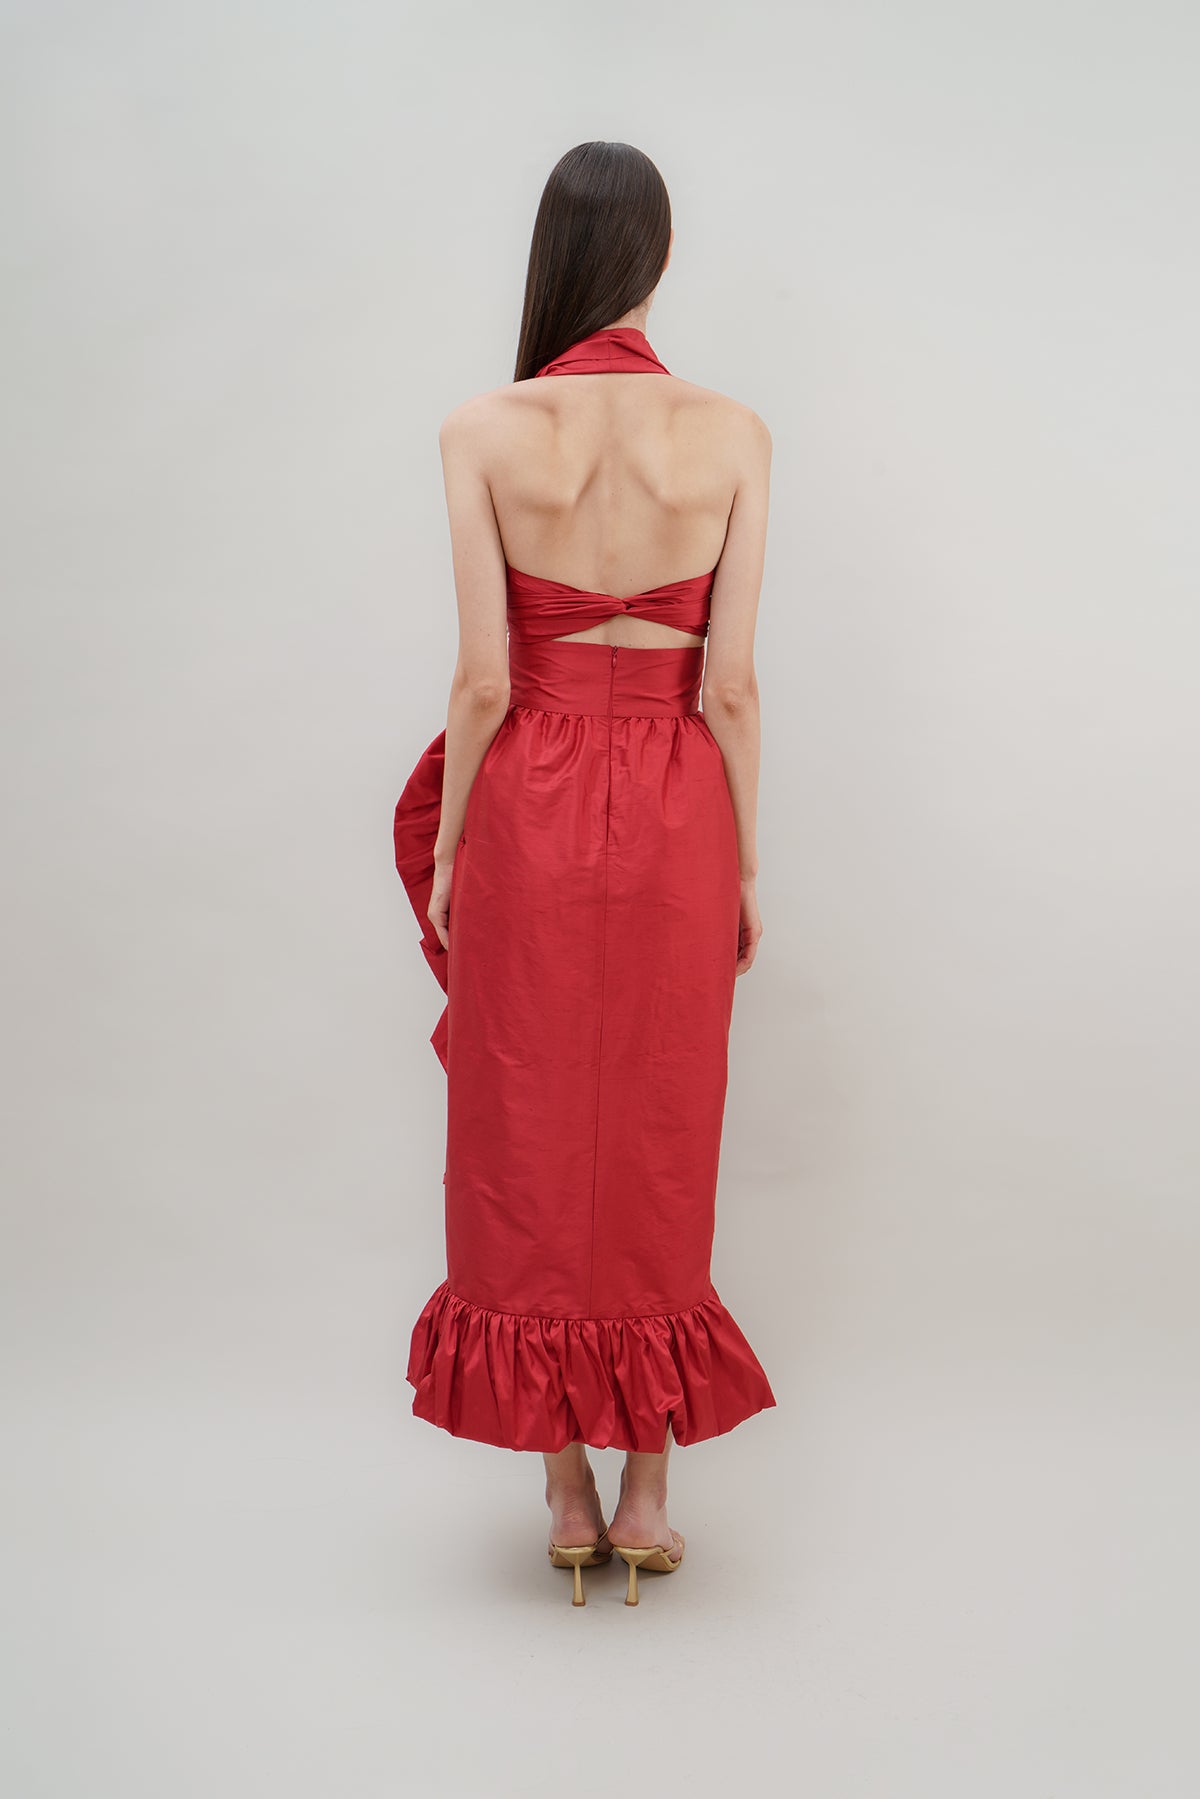 THE COQUELICOT SKIRT